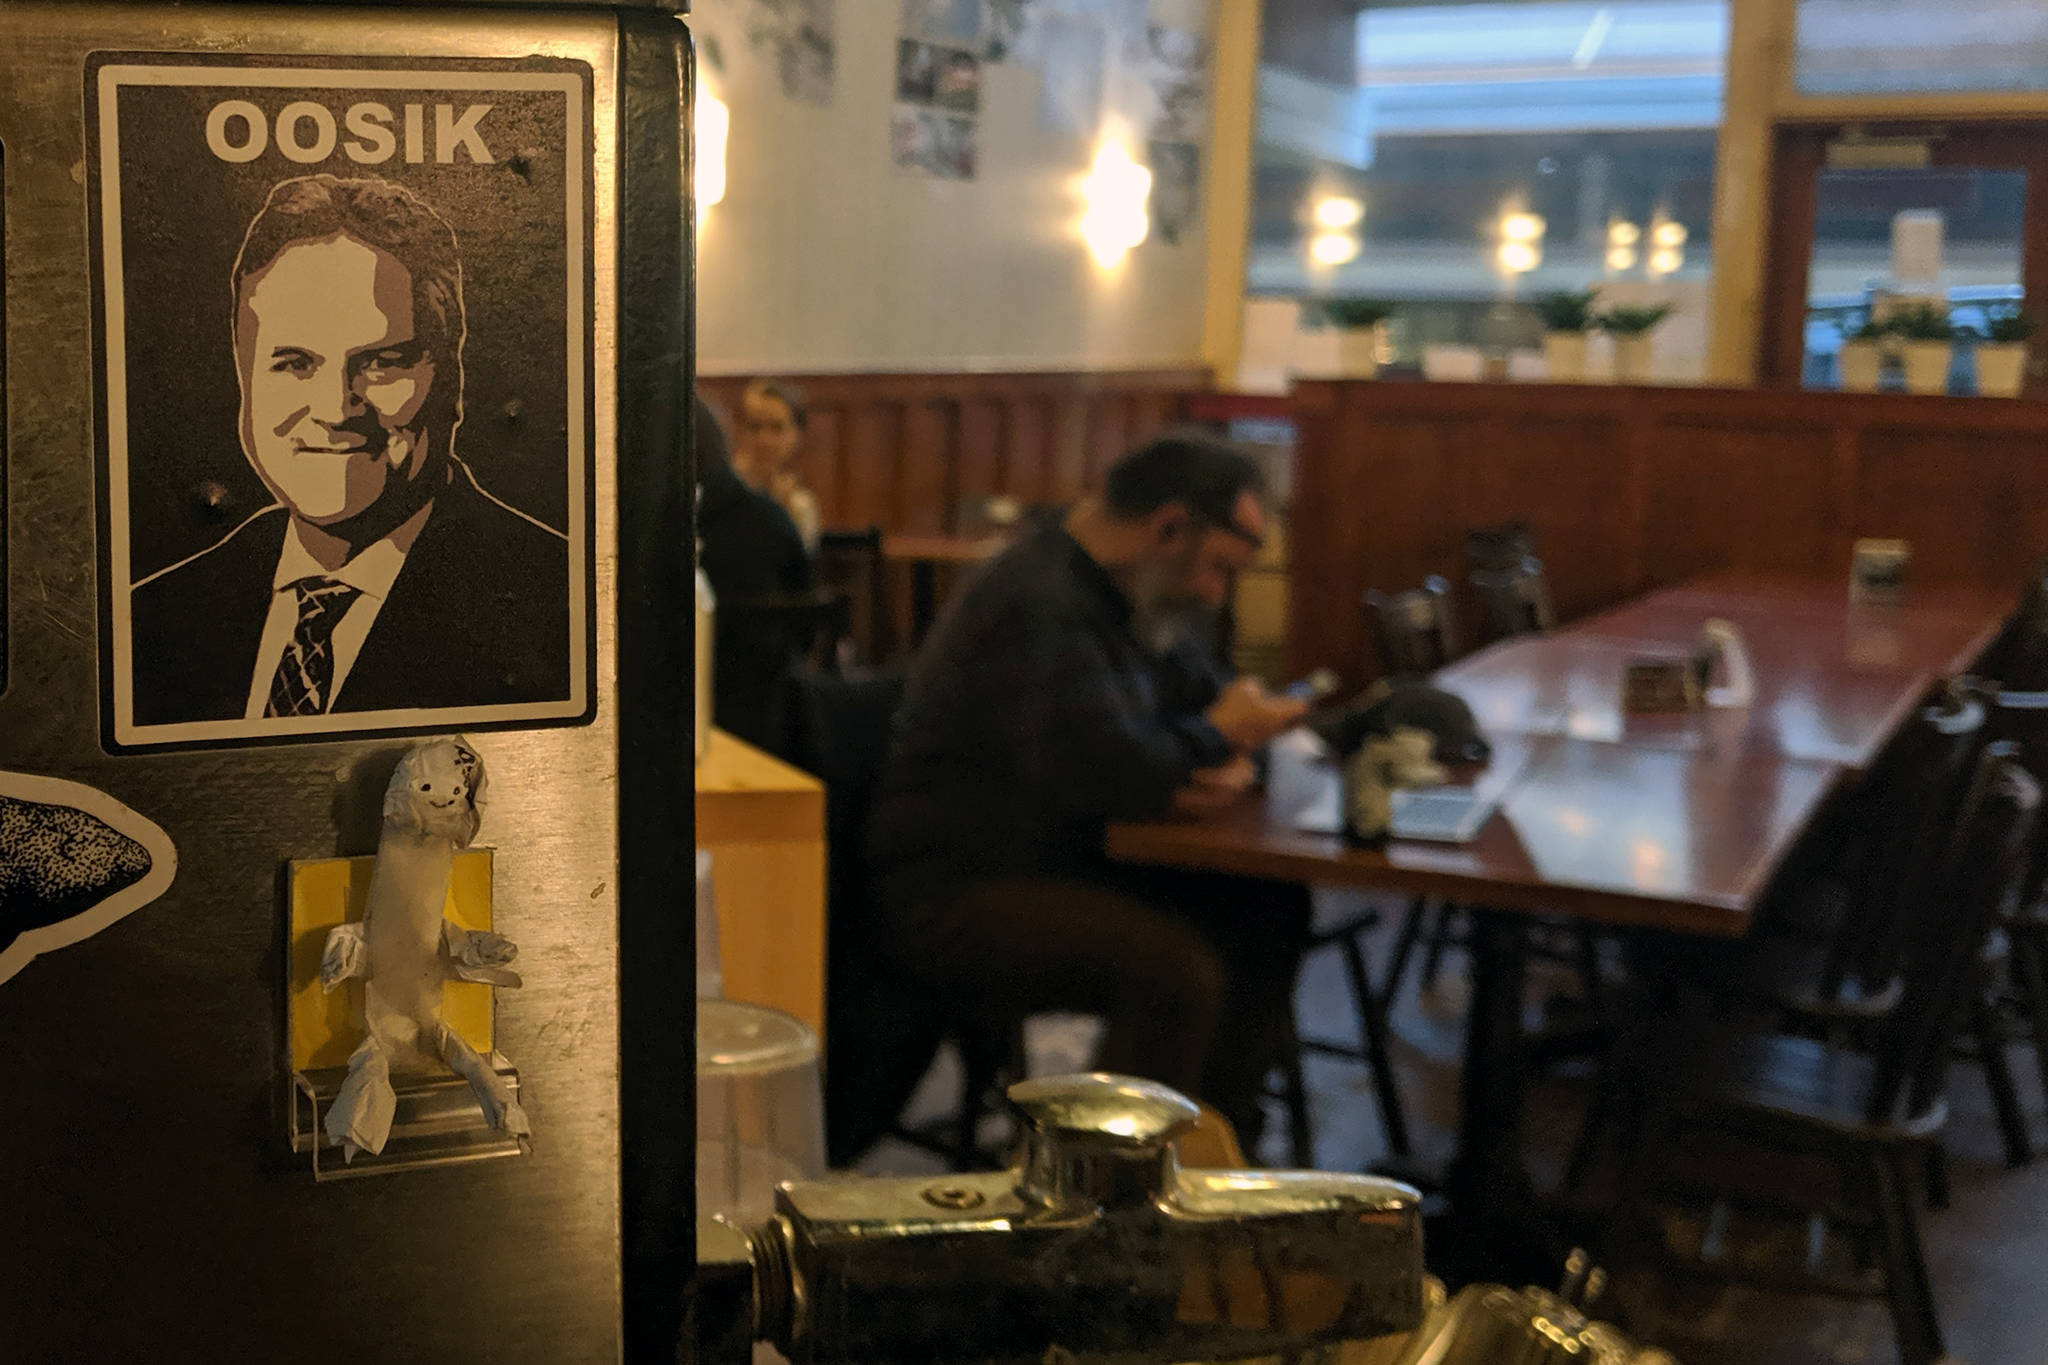 A sticker featuring Gov. Mike Dunleavy and the uniquely Alaskan insult, “Oosik,” can be seen in the Rookery Cafe. The artist behind the sticker Matt Hamilton said he bears Dunleavy no ill will. (Ben Hohenstatt | Capital City Weekly)